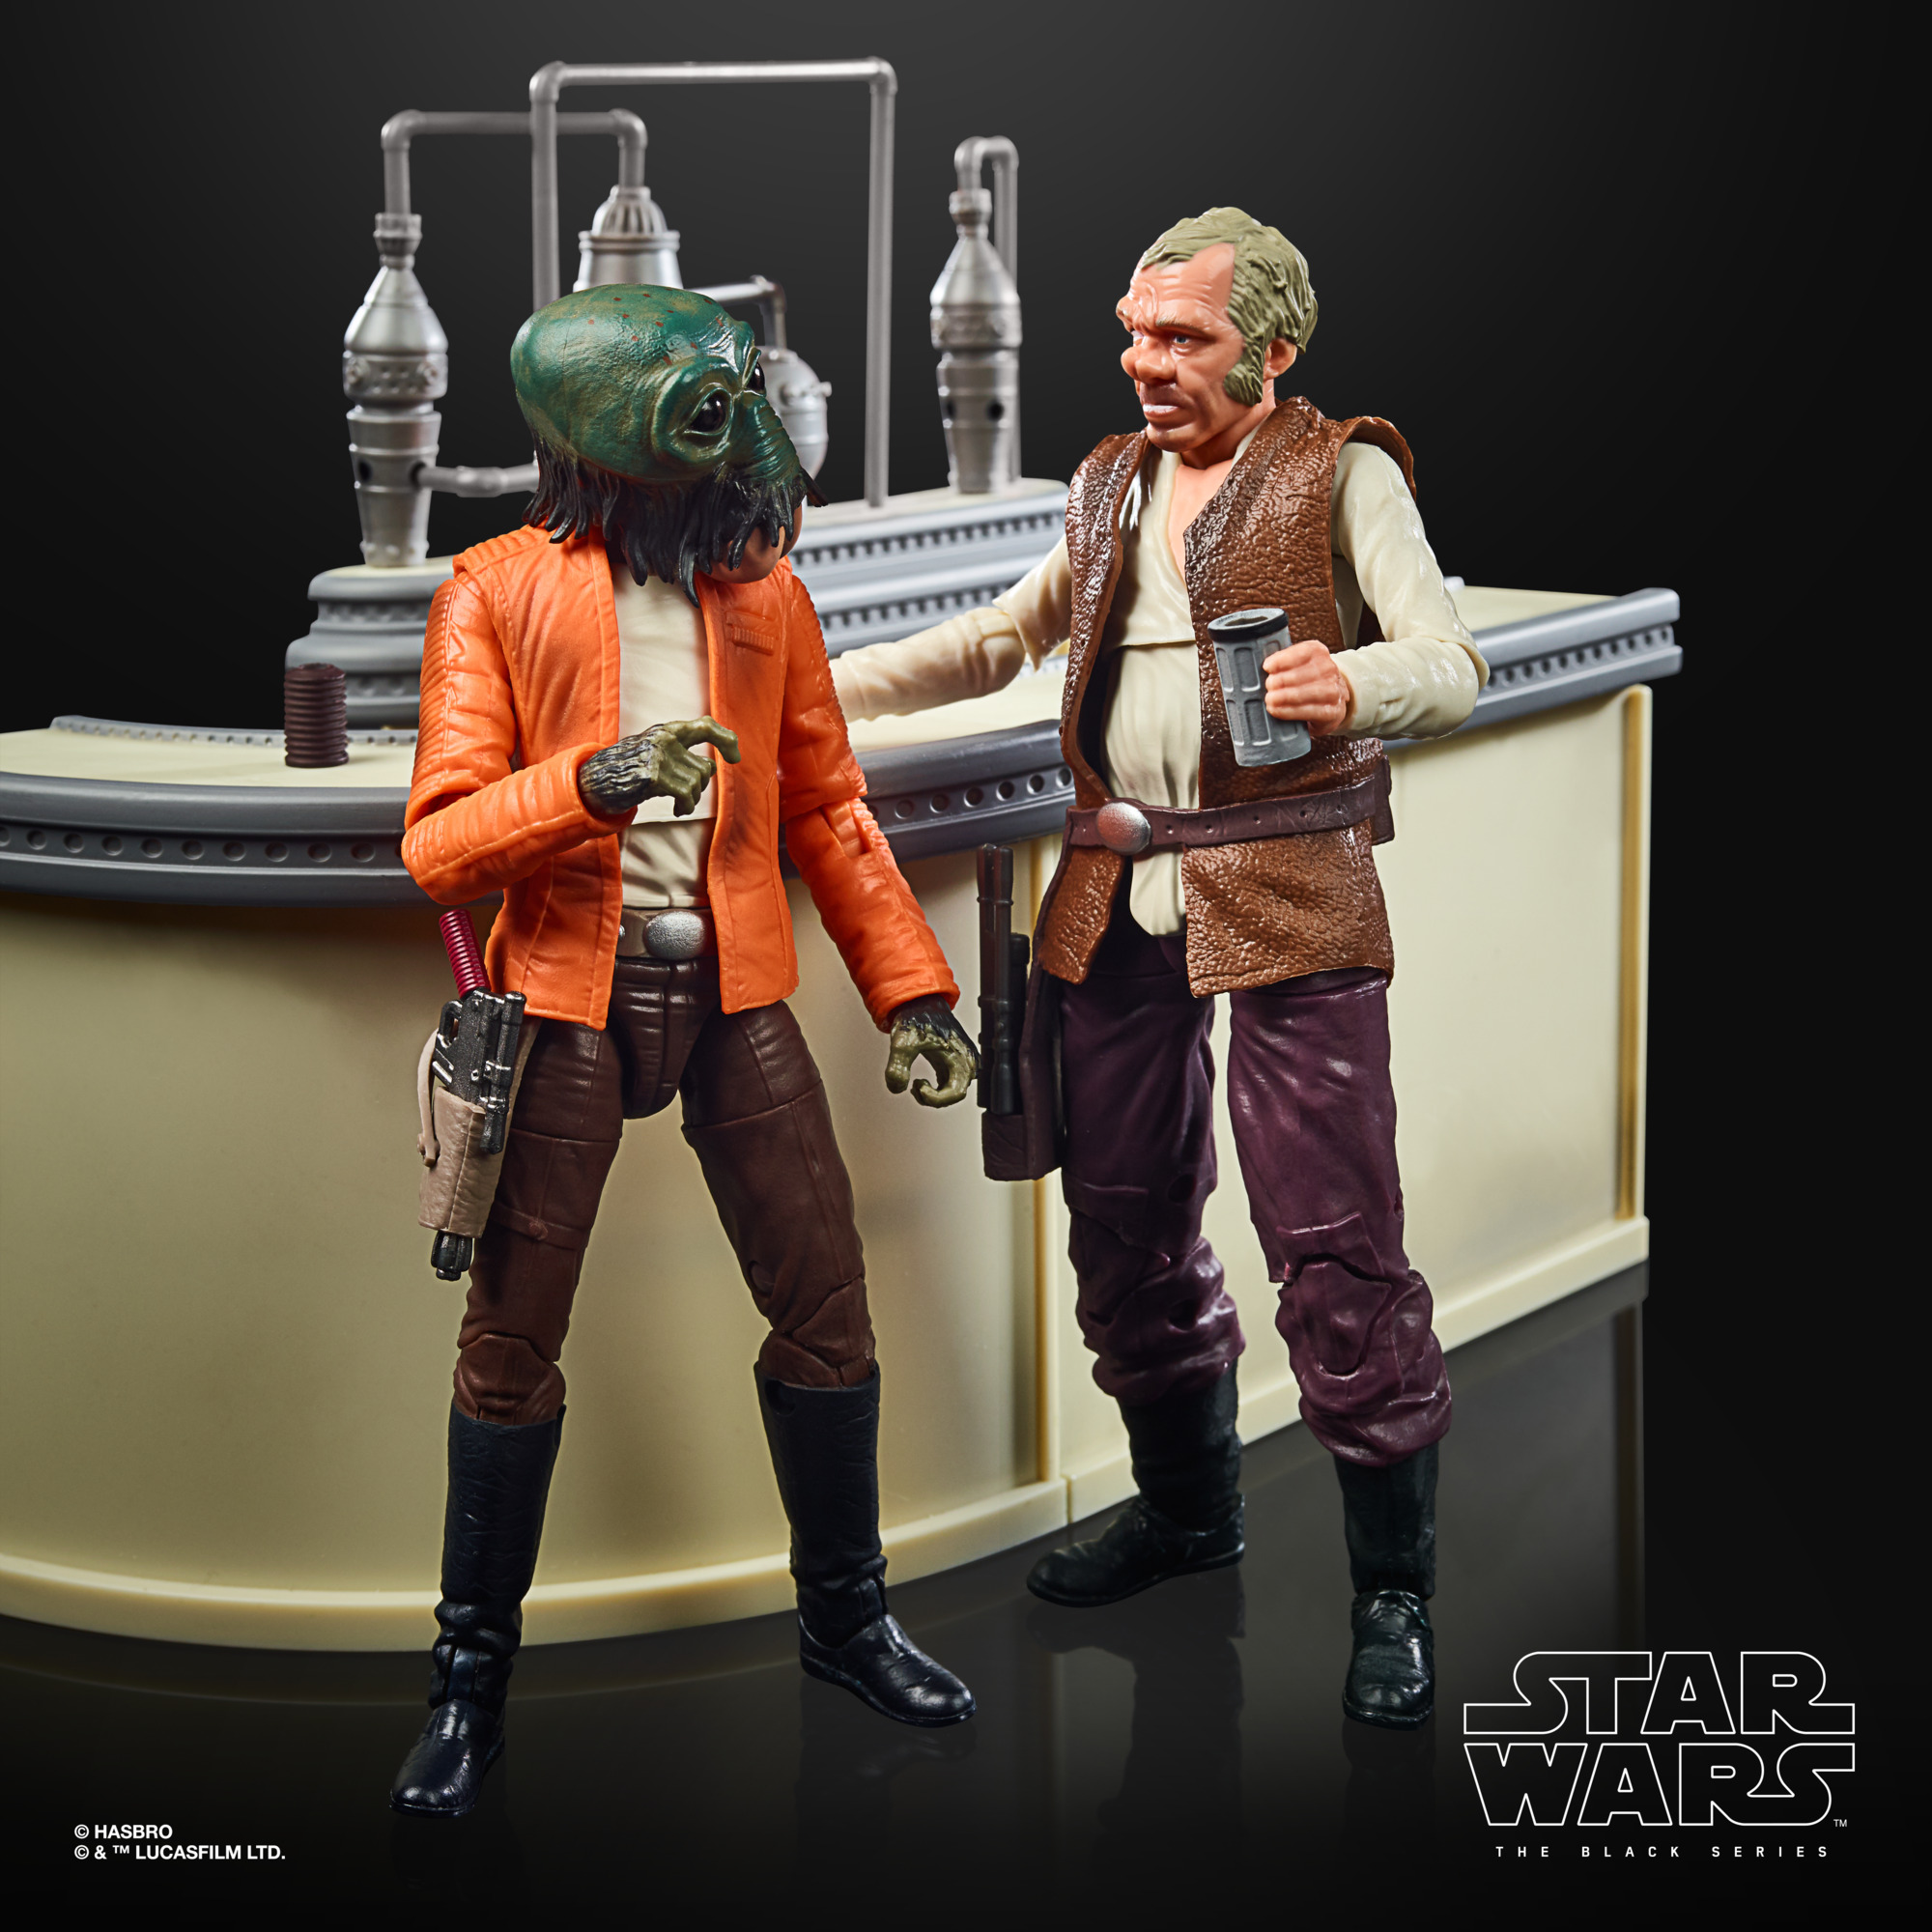 STAR-WARS-THE-BLACK-SERIES-THE-POWER-OF-THE-FORCE-CANTINA-SHOWDOWN-Playset-oop-8